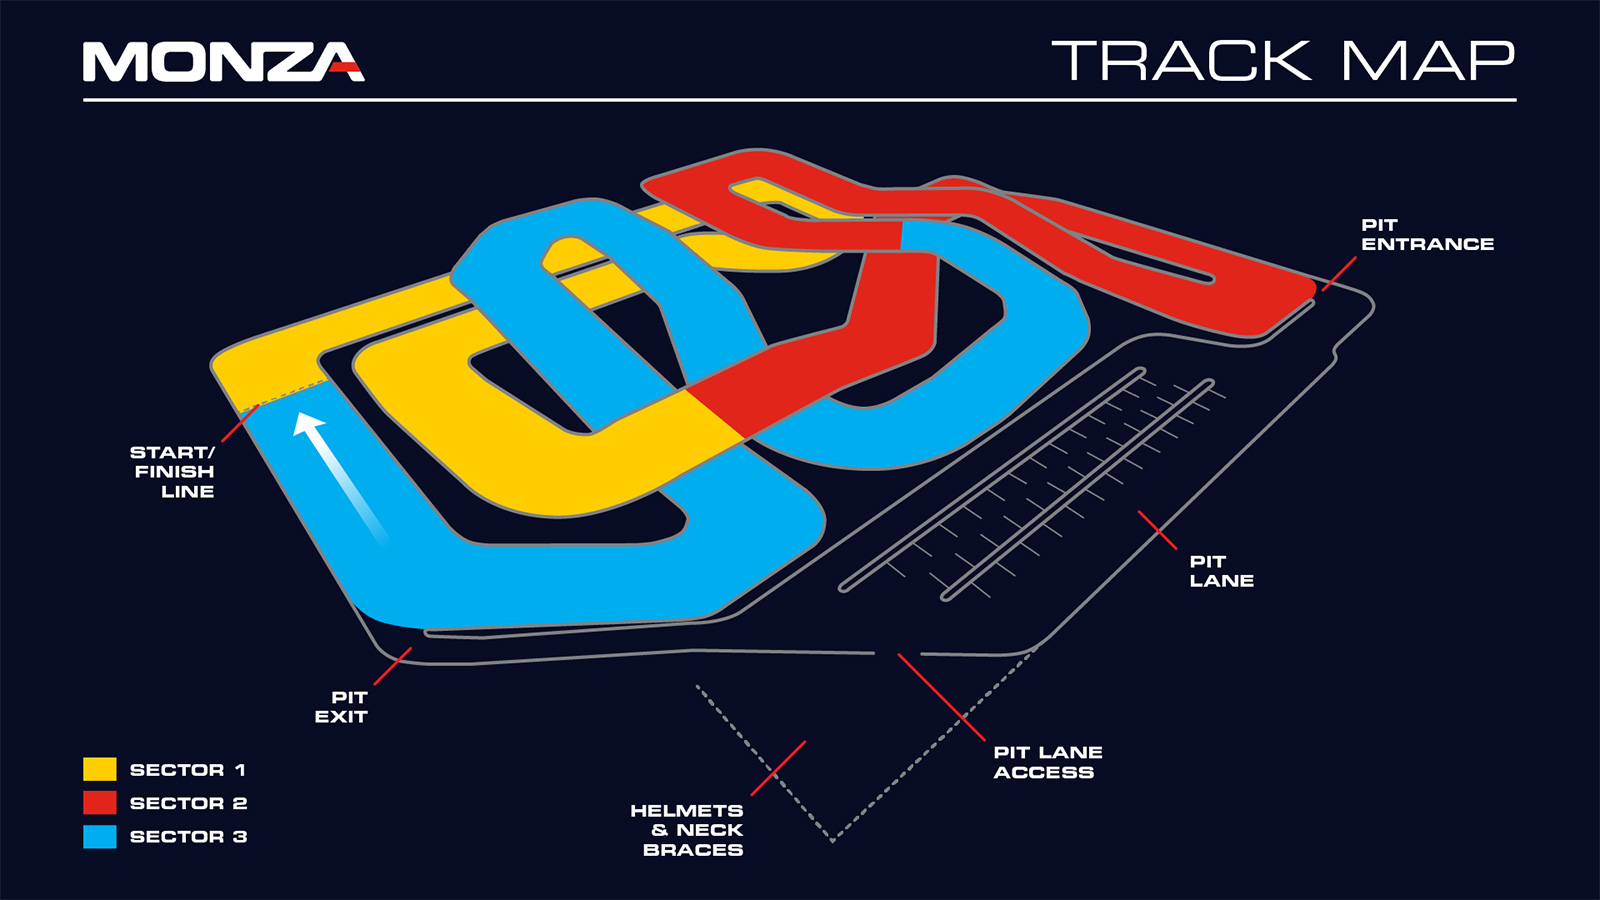 MONZA Track map with sectors